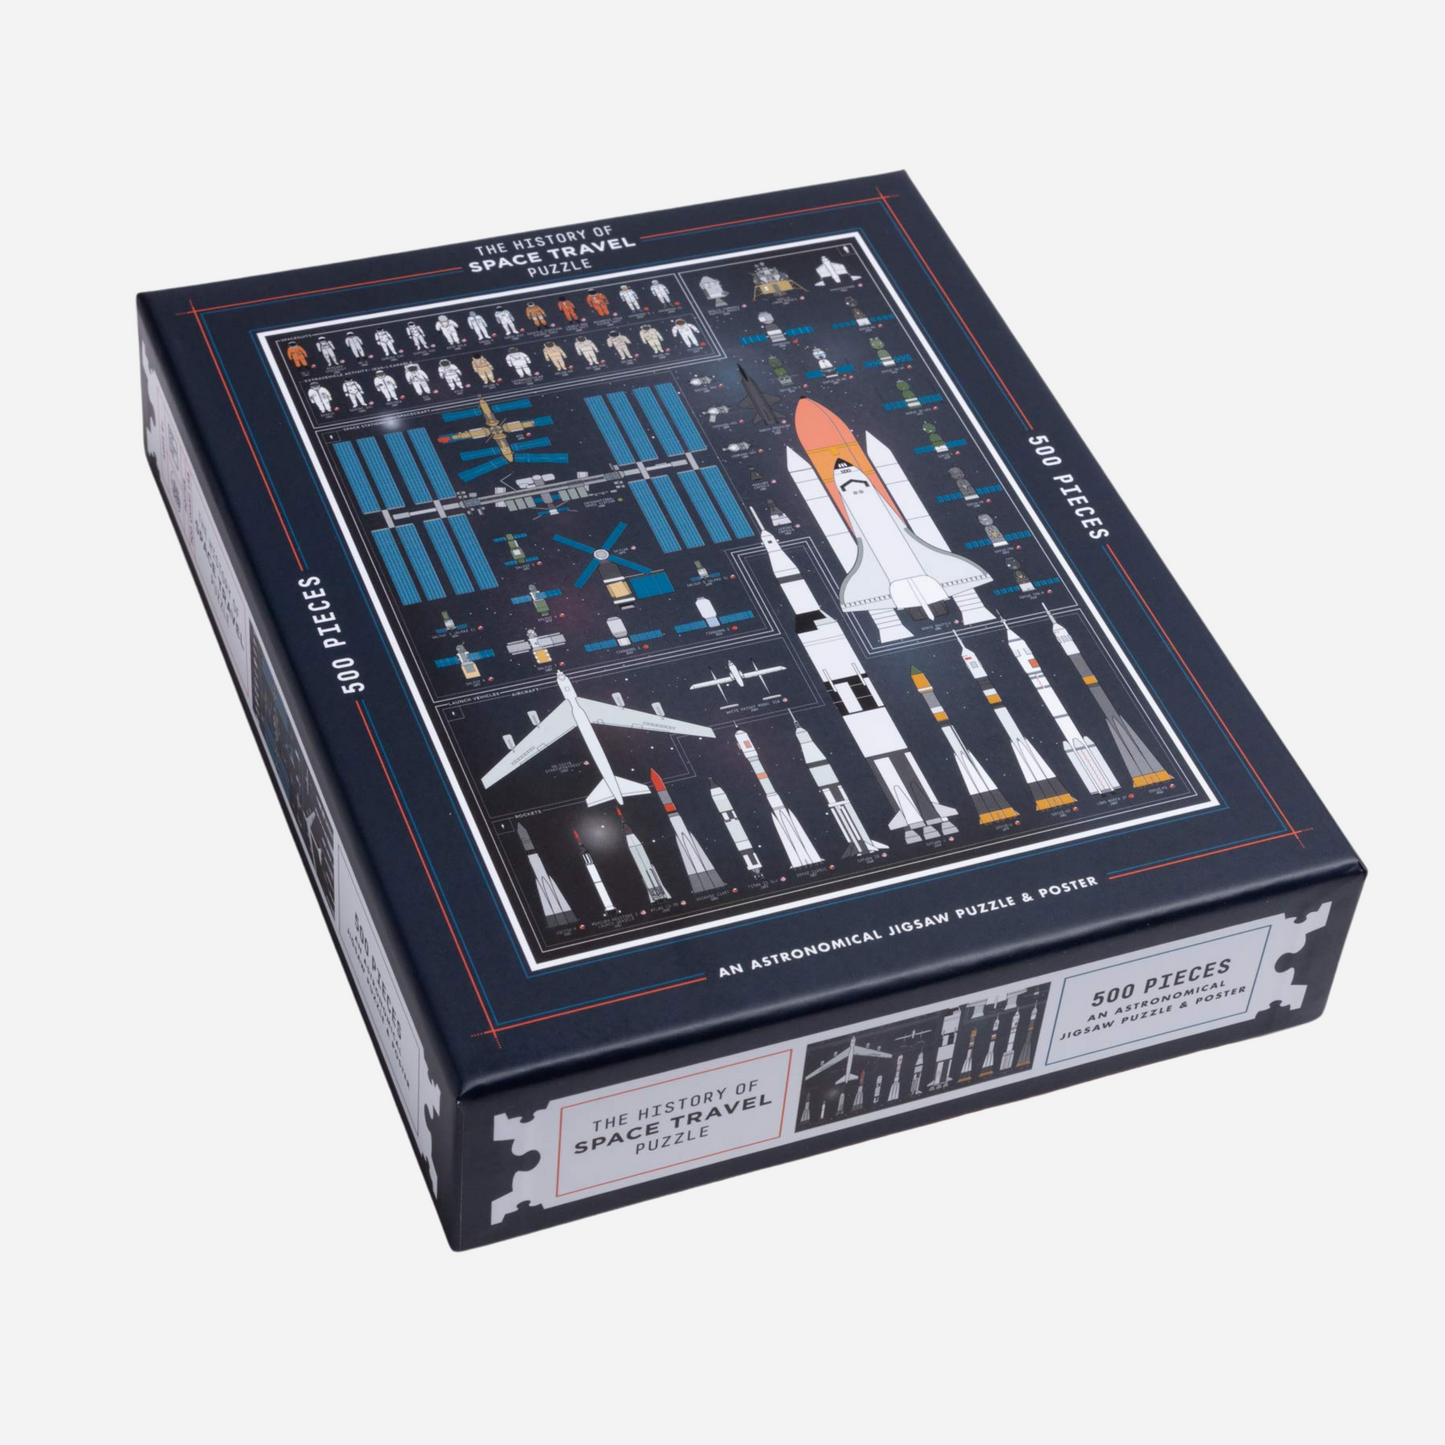 500-piece History of Space Travel Puzzle